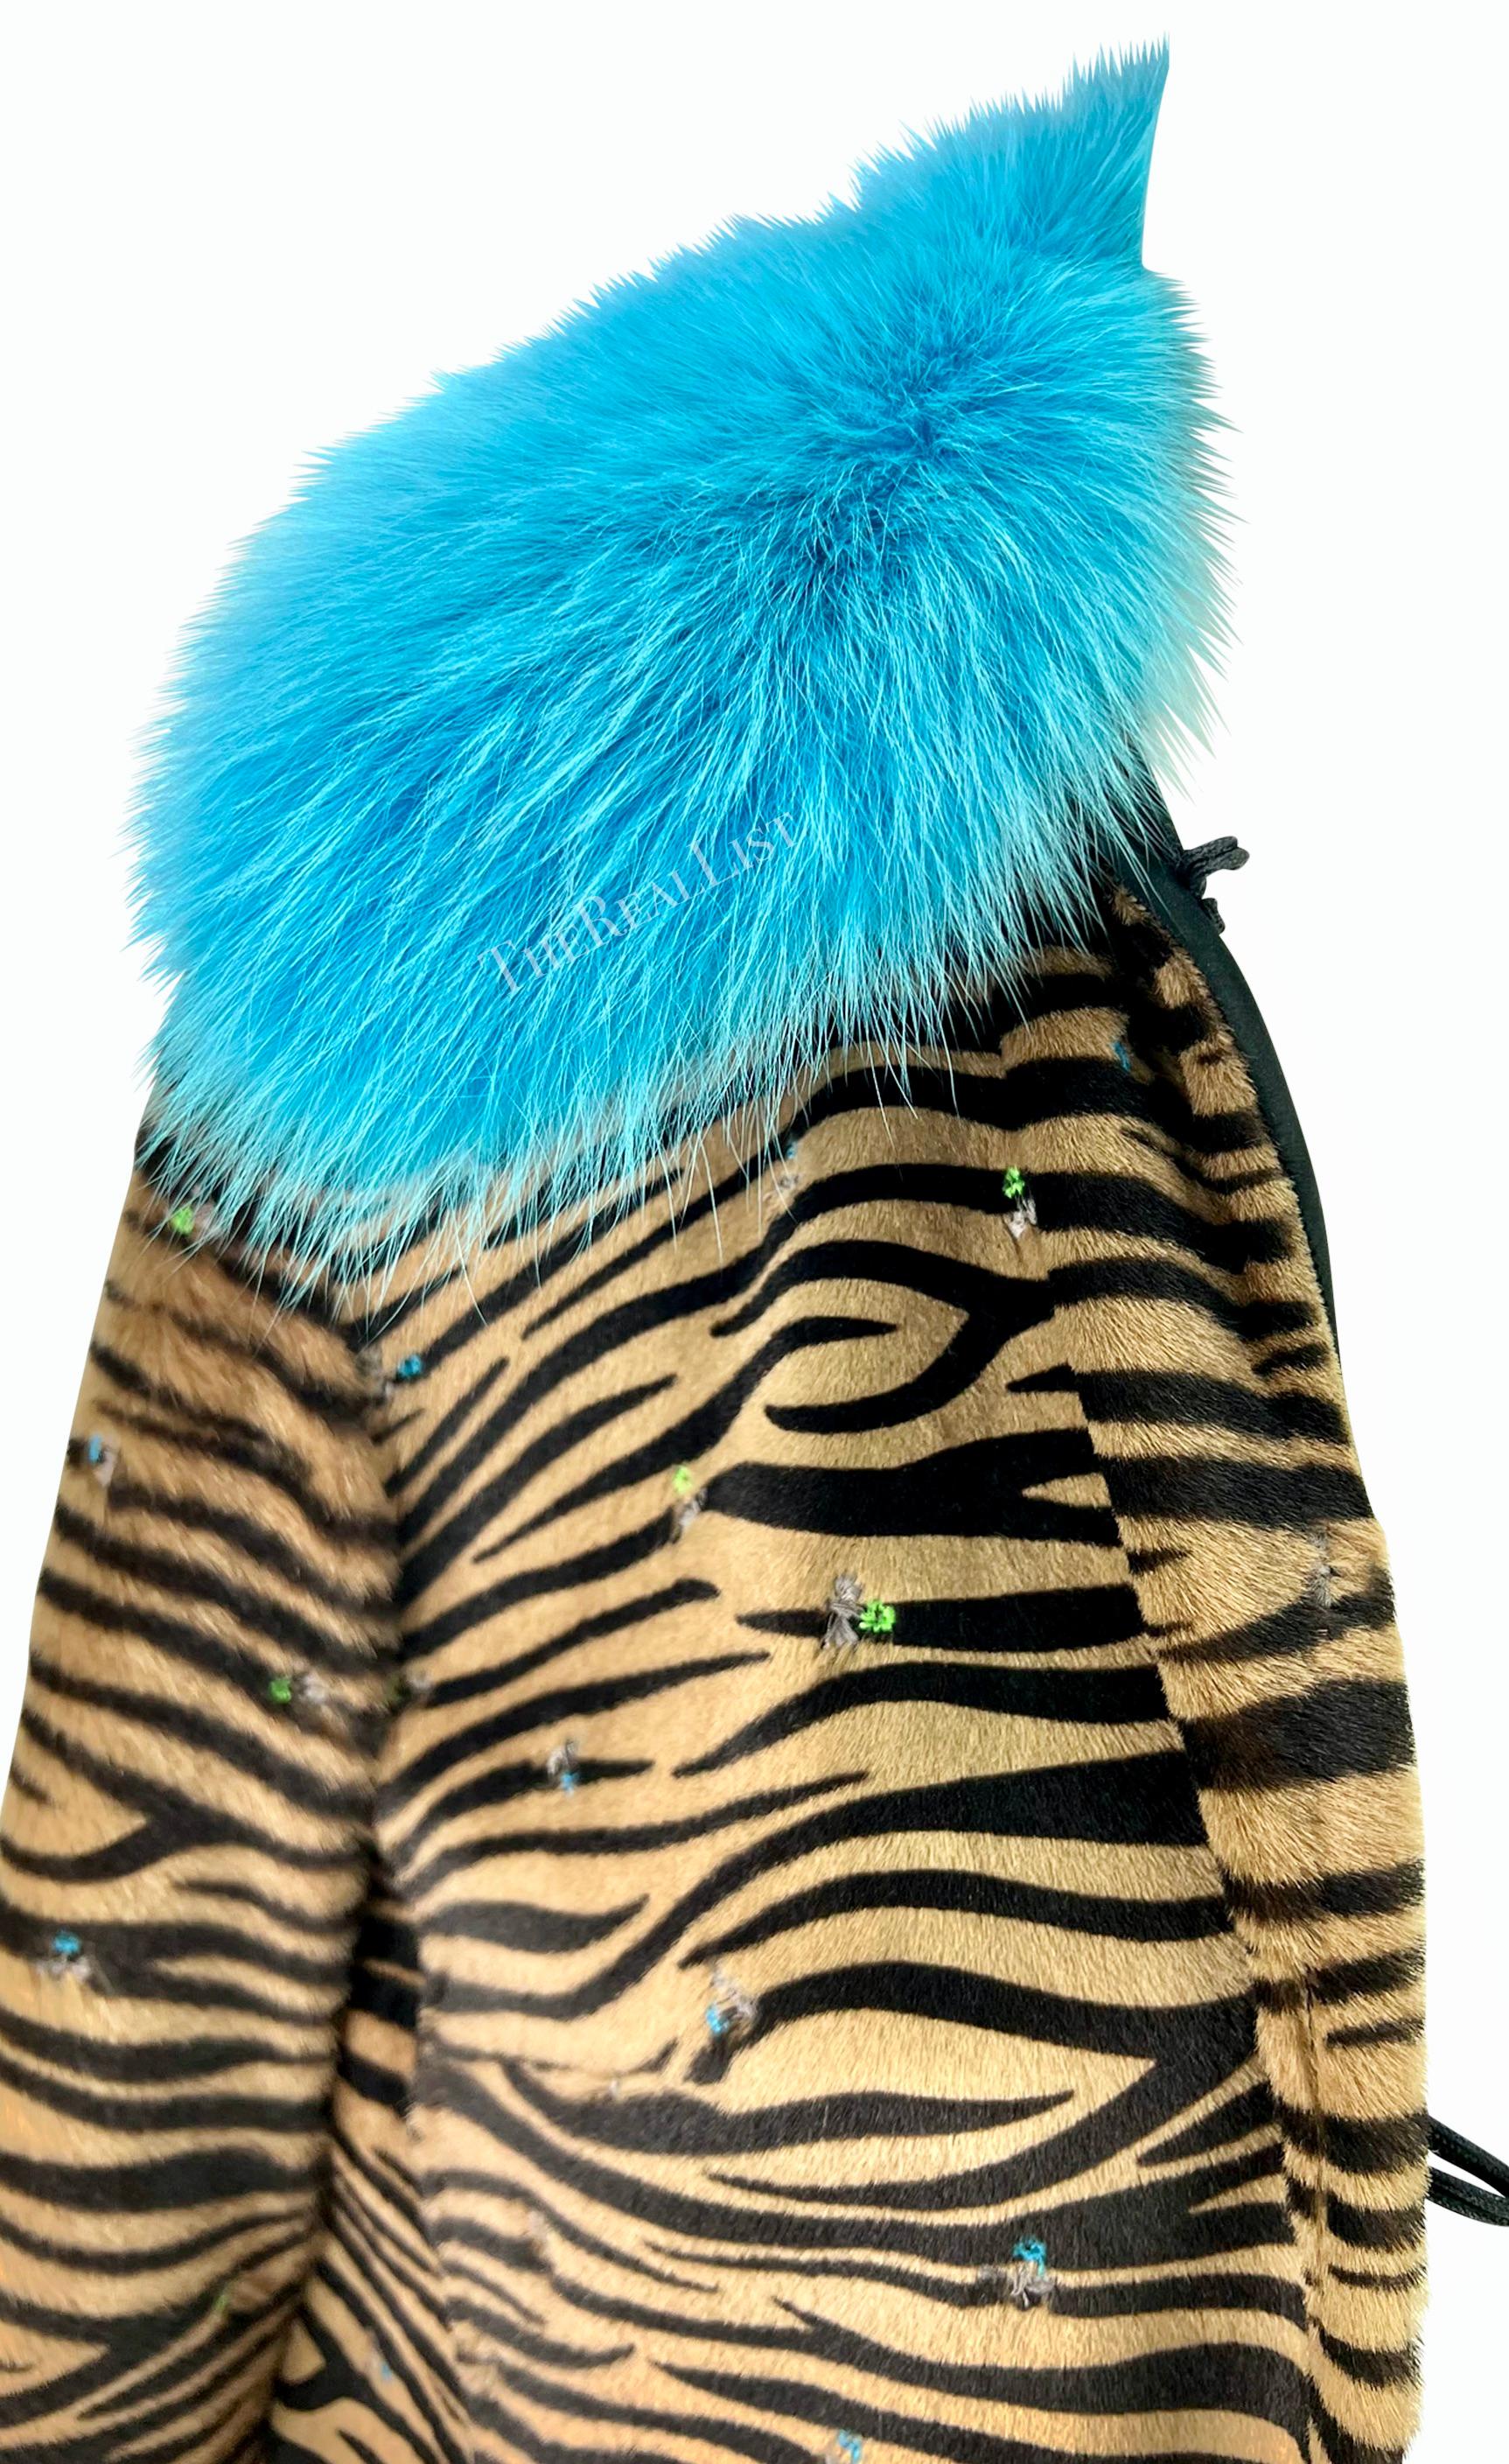 F/W 1999 Gianni Versace by Donatella Embroidered Pony Hair Blue Fox Fur Coat For Sale 2